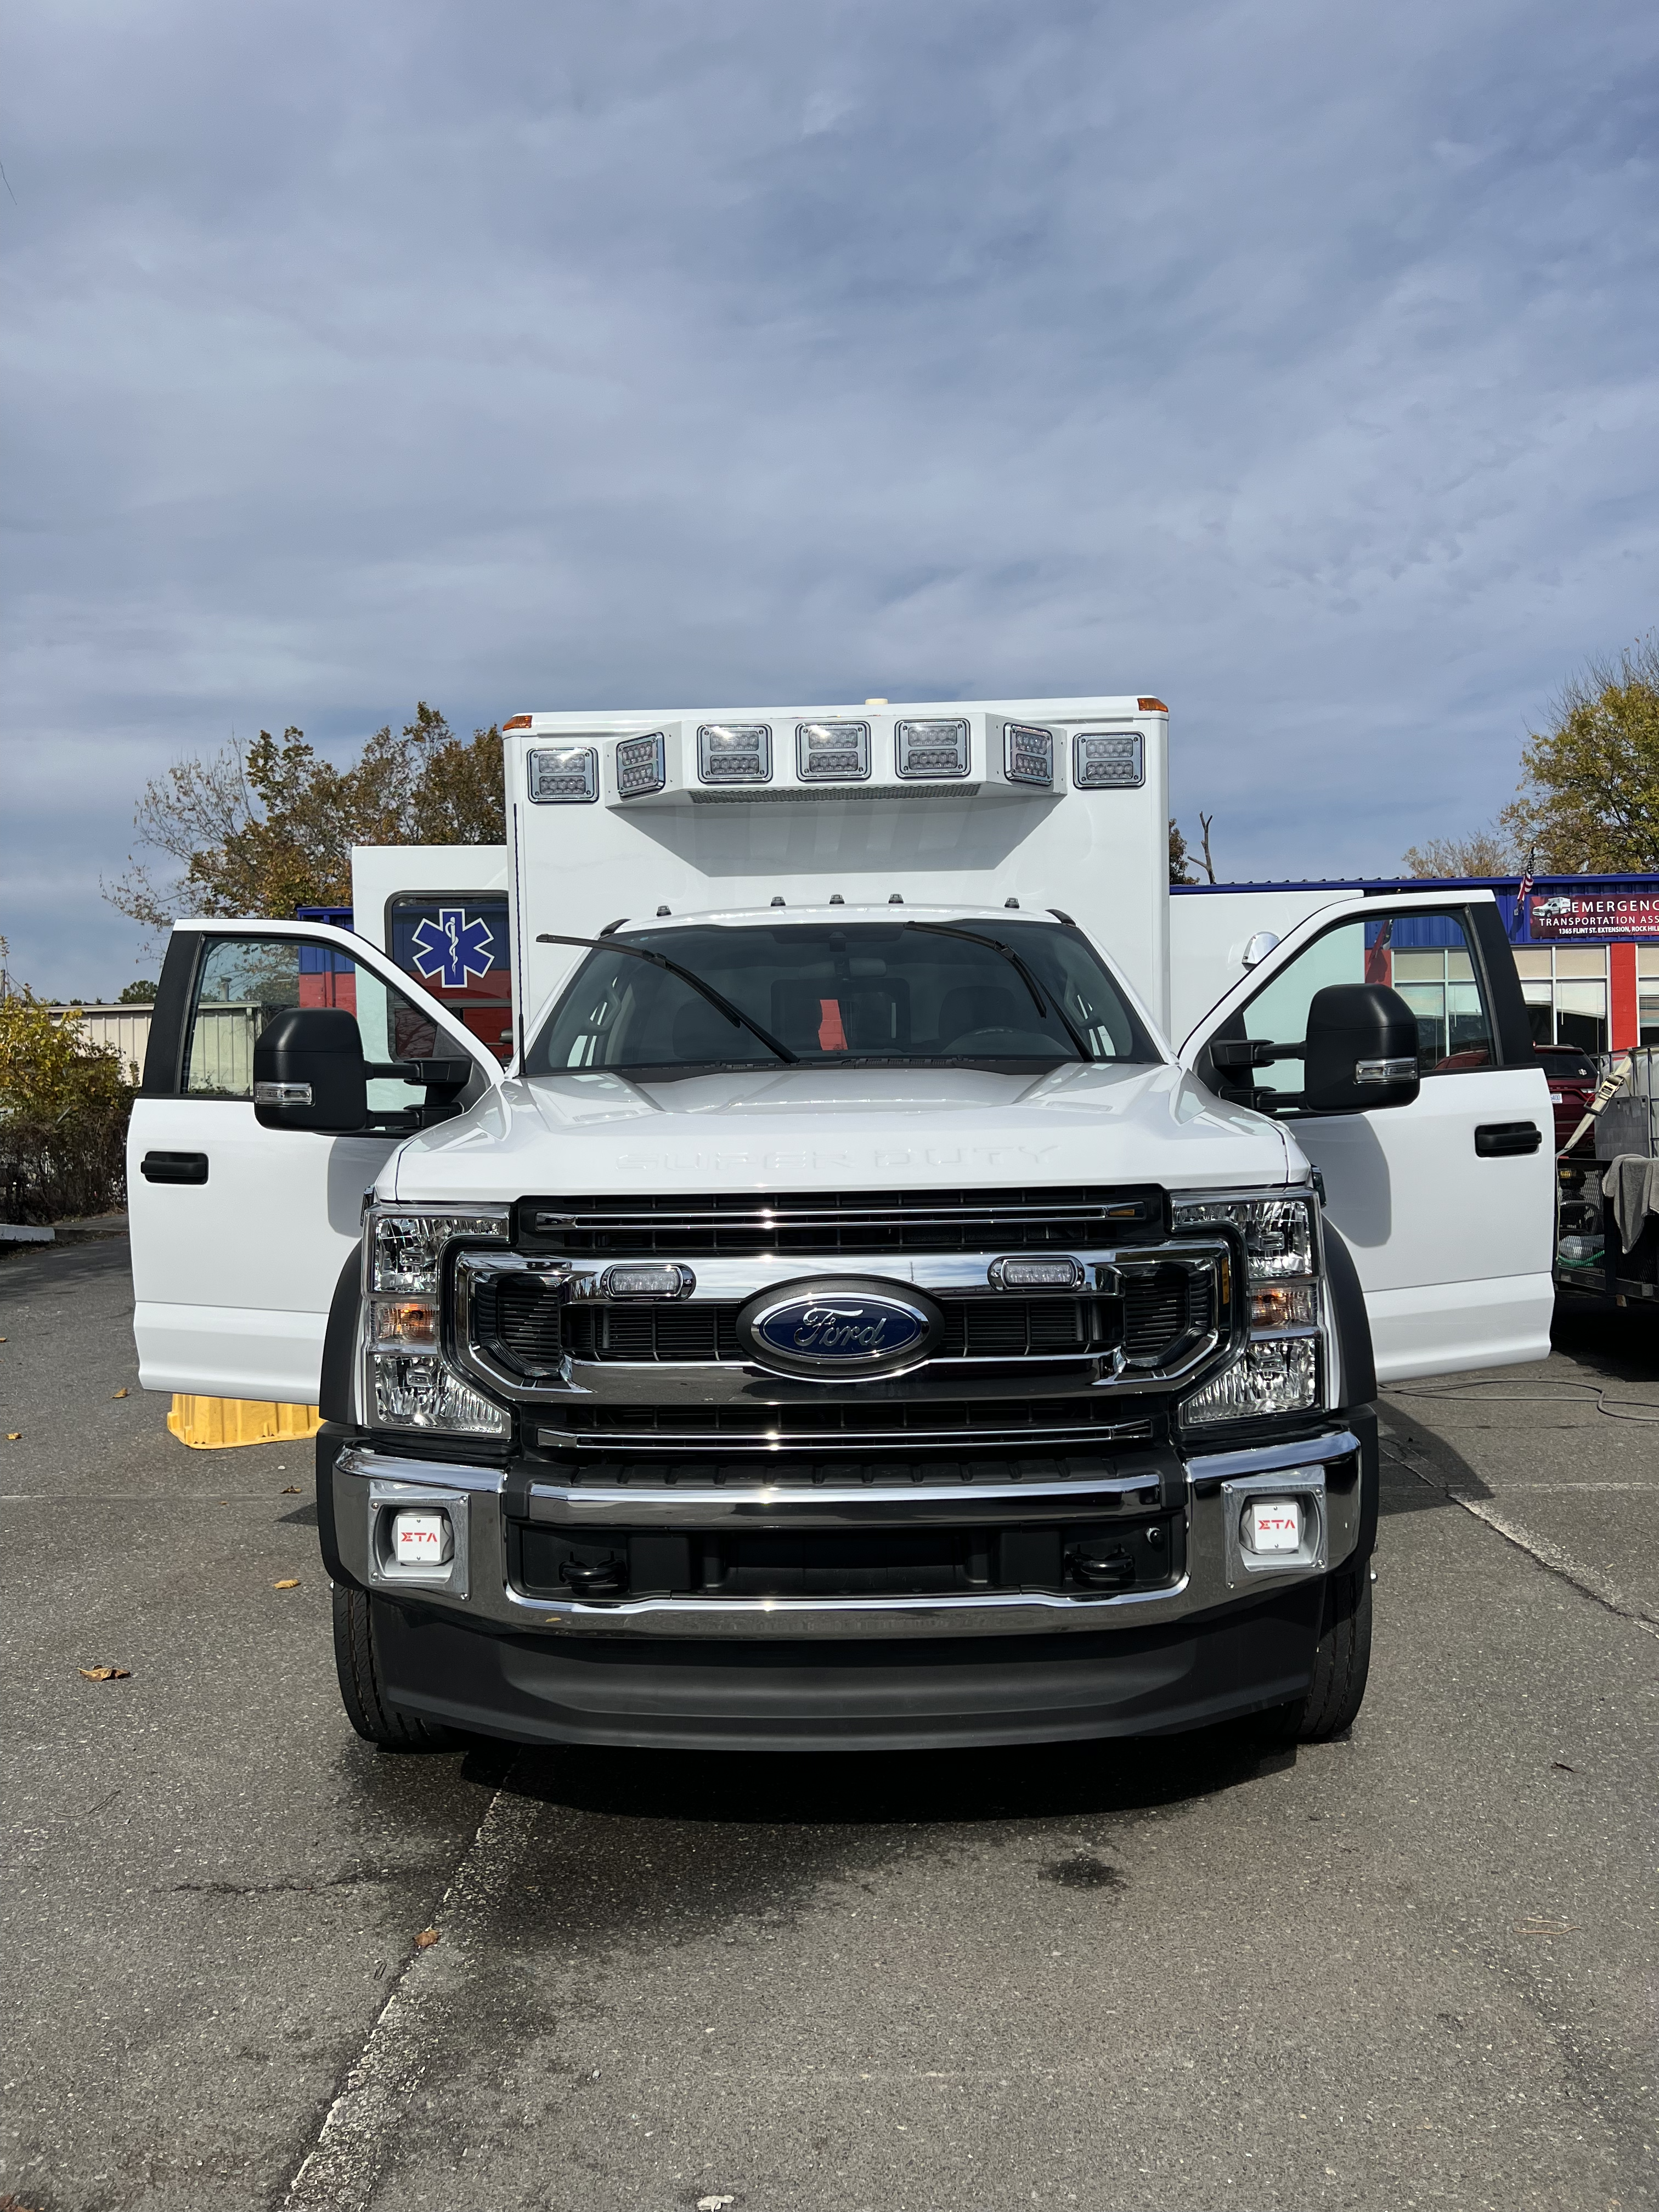 ambulance remount type 1 on ford f450 4x4 chassis